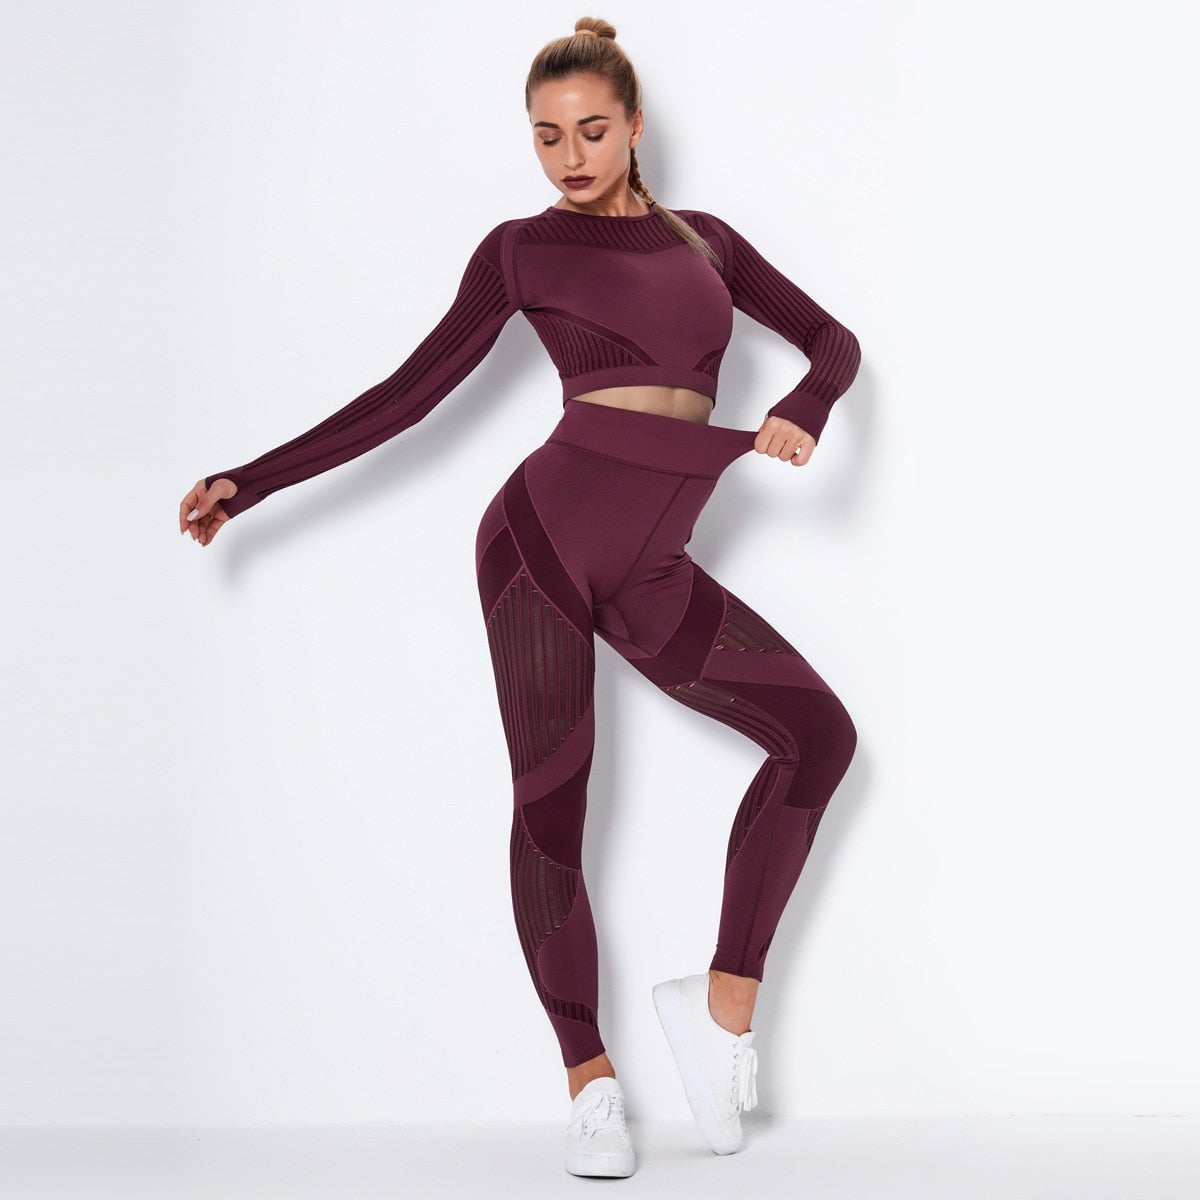 Workout Sets For Women 2 Piece Seamless Yoga Outfit Tracksuit High Waisted Yoga Leggings And Crop Top Gym Clothes Set wineredL  109.99 EZYSELLA SHOP